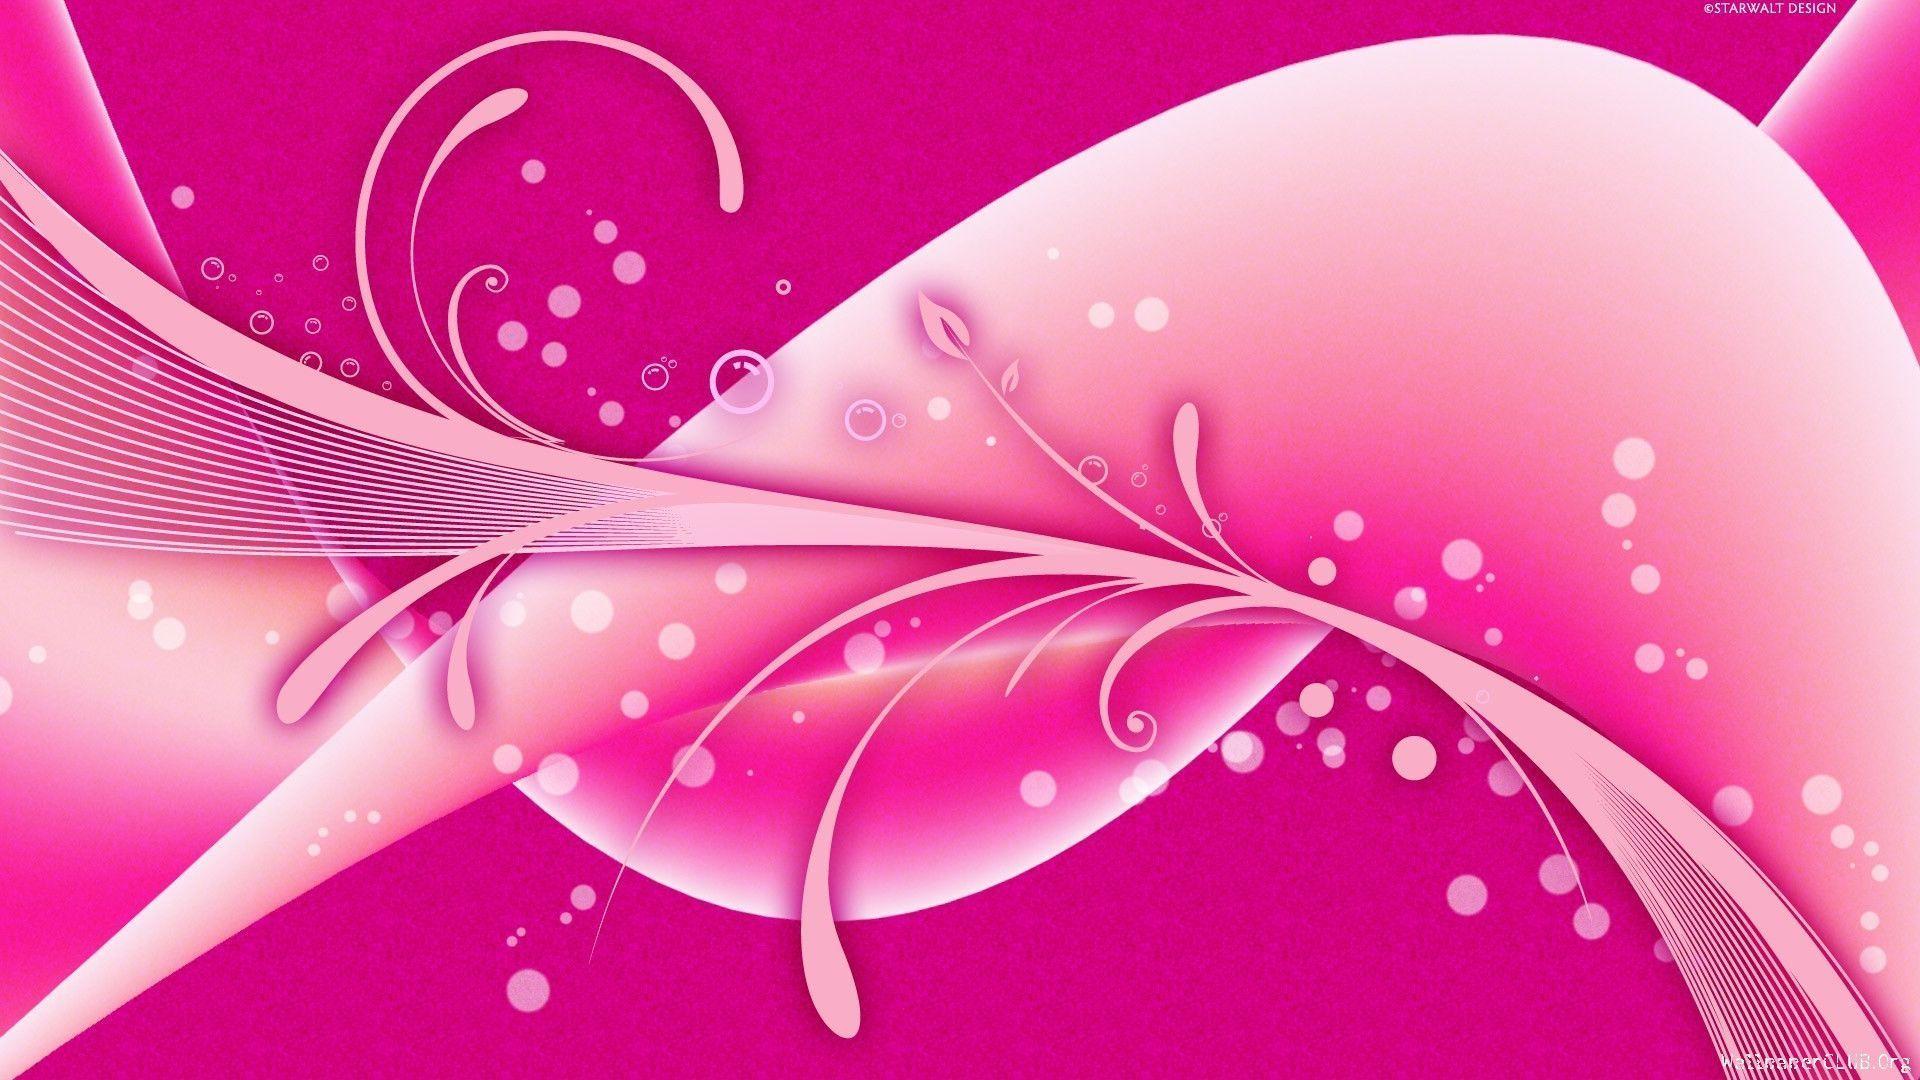 Wallpaper For > Purple And Pink Design Wallpaper